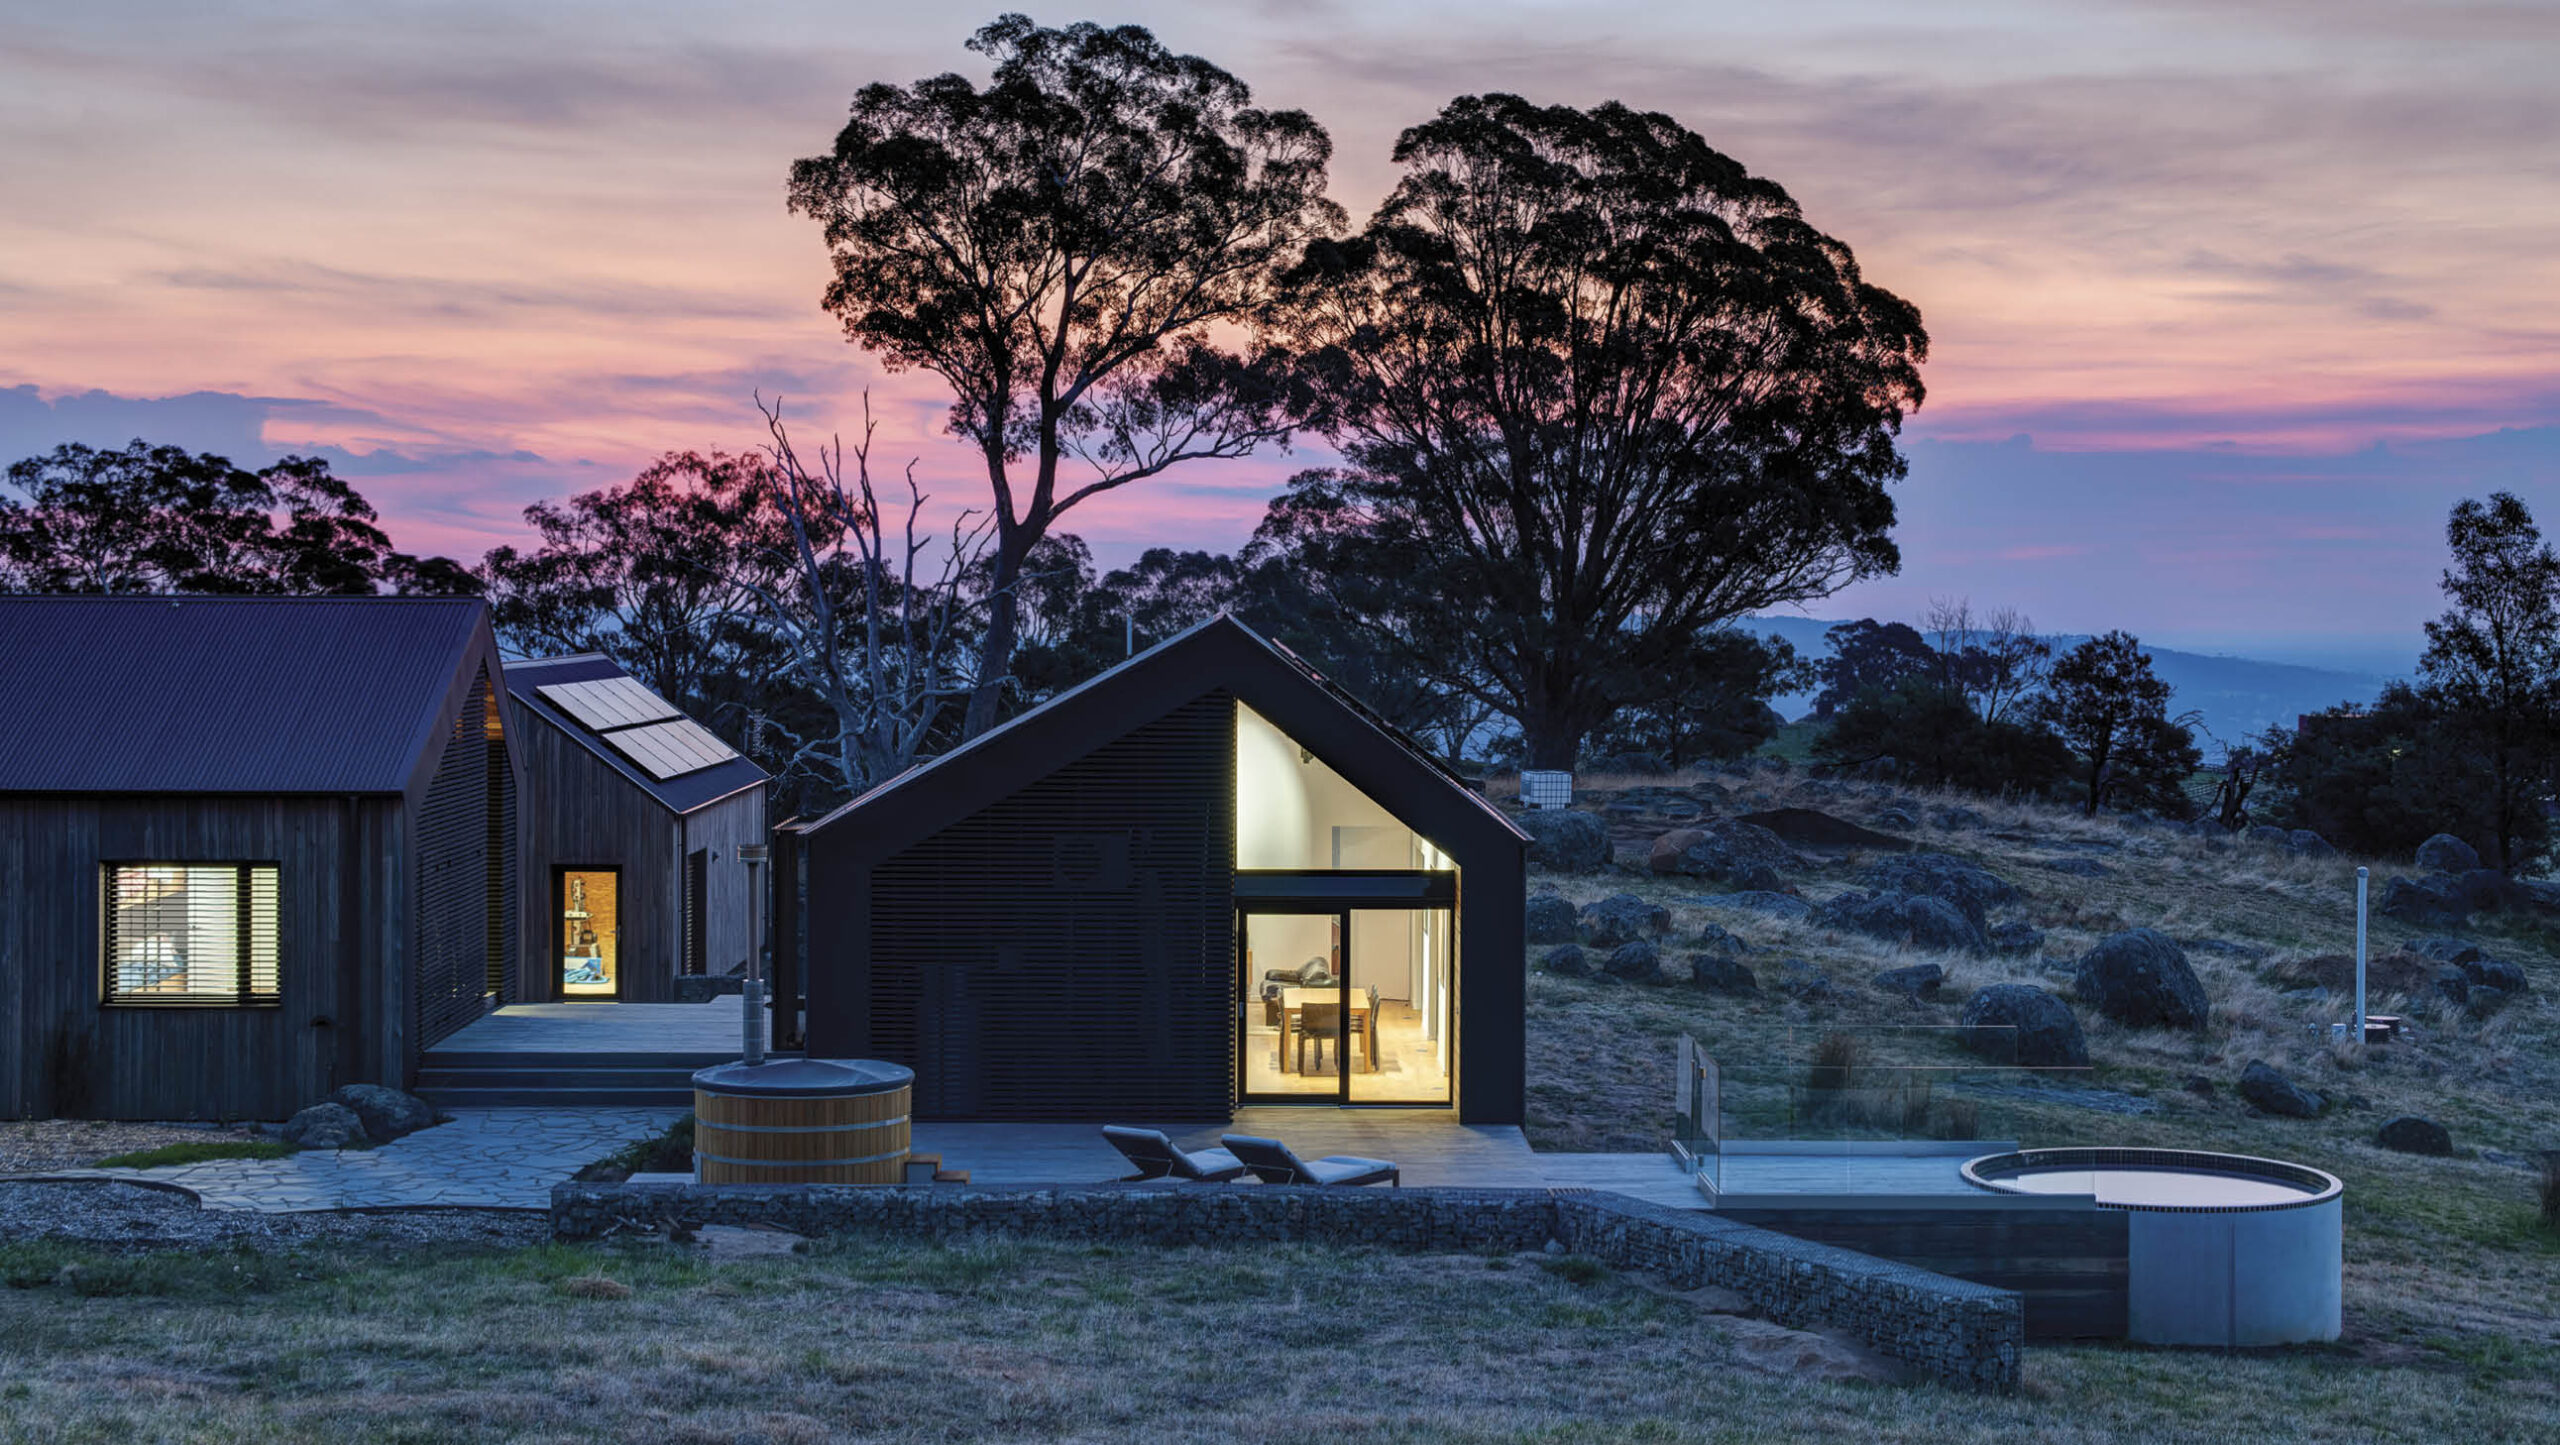 The Our FabHaus prefabricated design by John Tallis is Passivehaus certified.